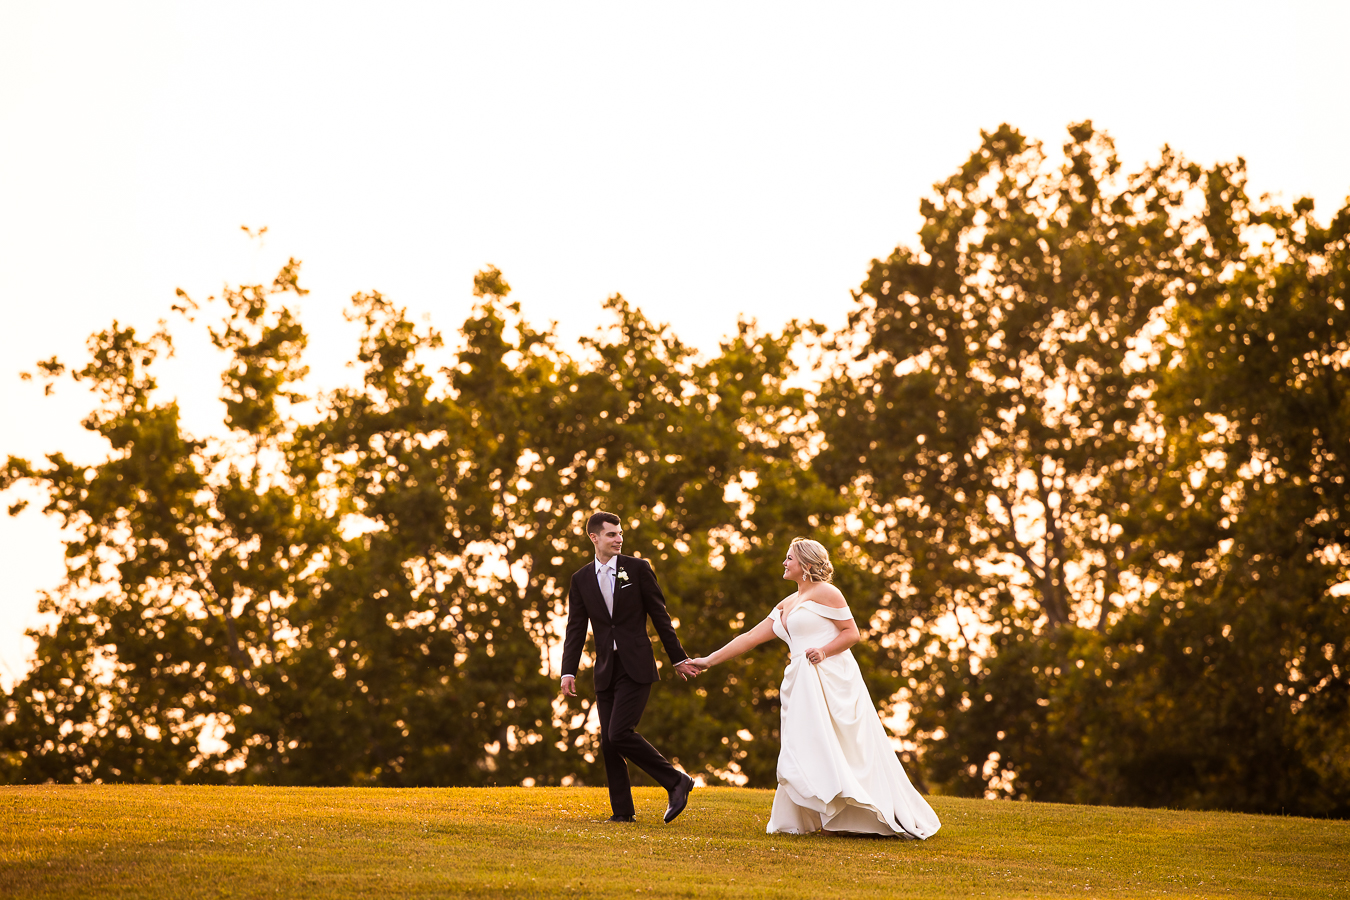 rhinehart photography captures this candid, creative image of the bride and groom as they run across and open field holding hands